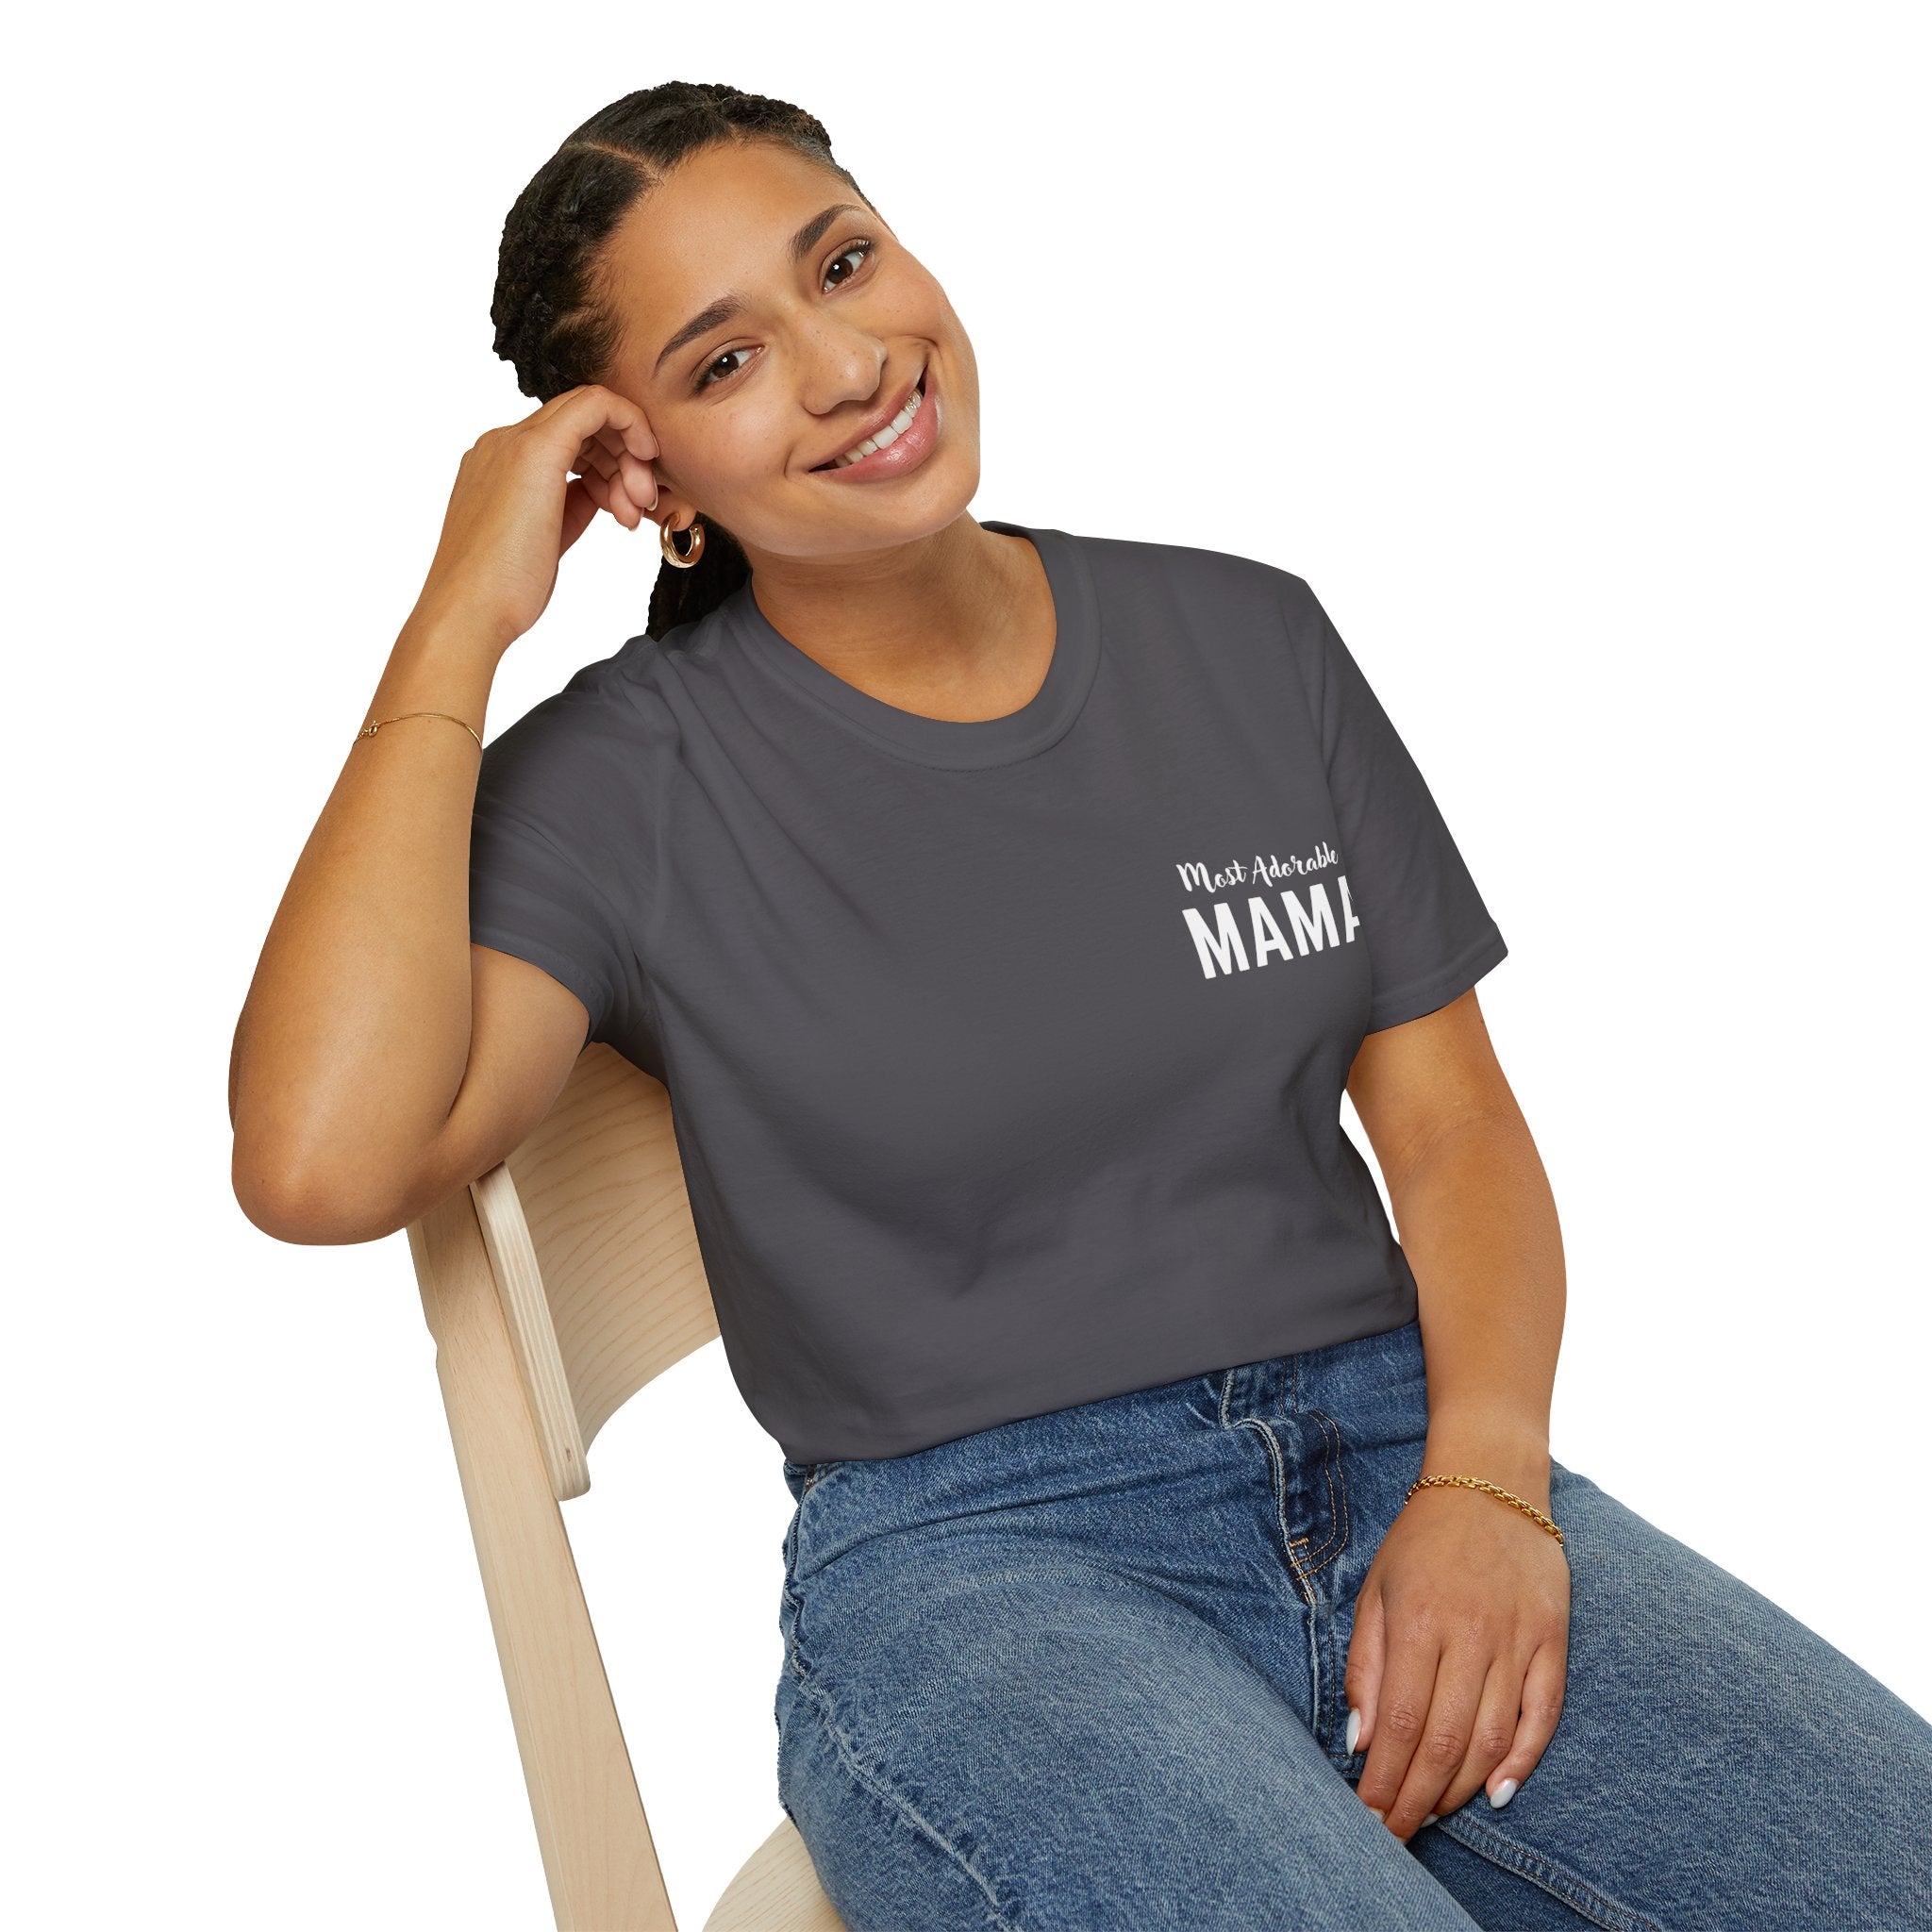 Mother's Day Gift Most Adorable Mama Crew Neck Unisex Softstyle T-Shirt, Gift for for Mom, Gift for Mama, Best Gift for Mom, Best Mother's Day Gift